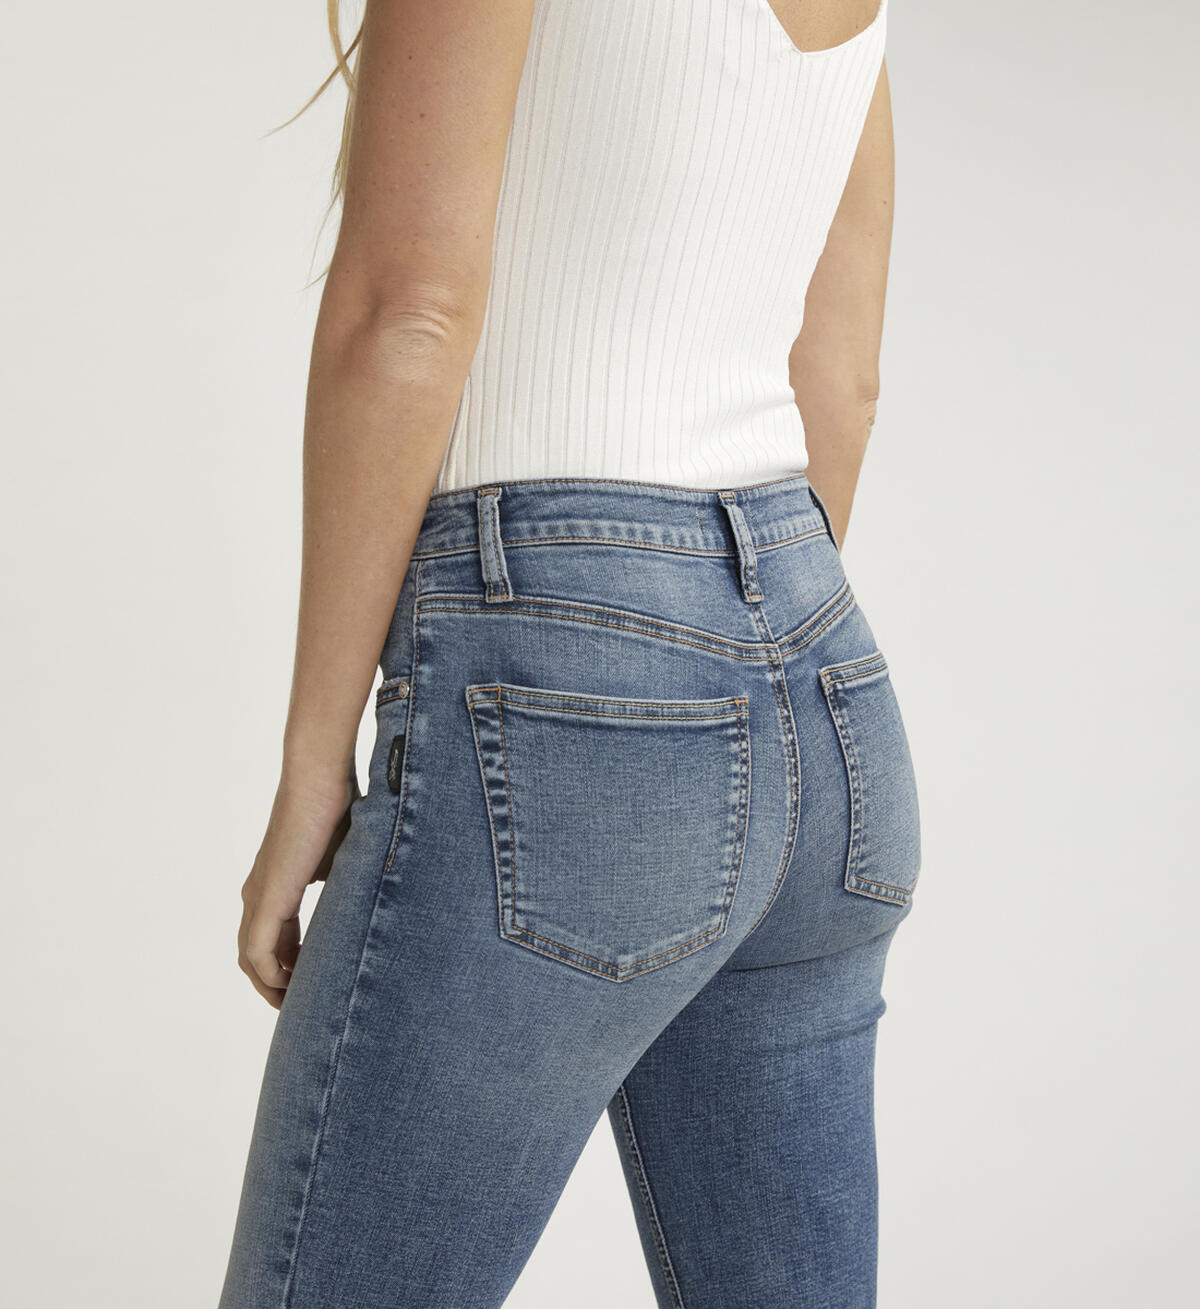 Most Wanted Mid Rise Straight Jeans, , hi-res image number 4